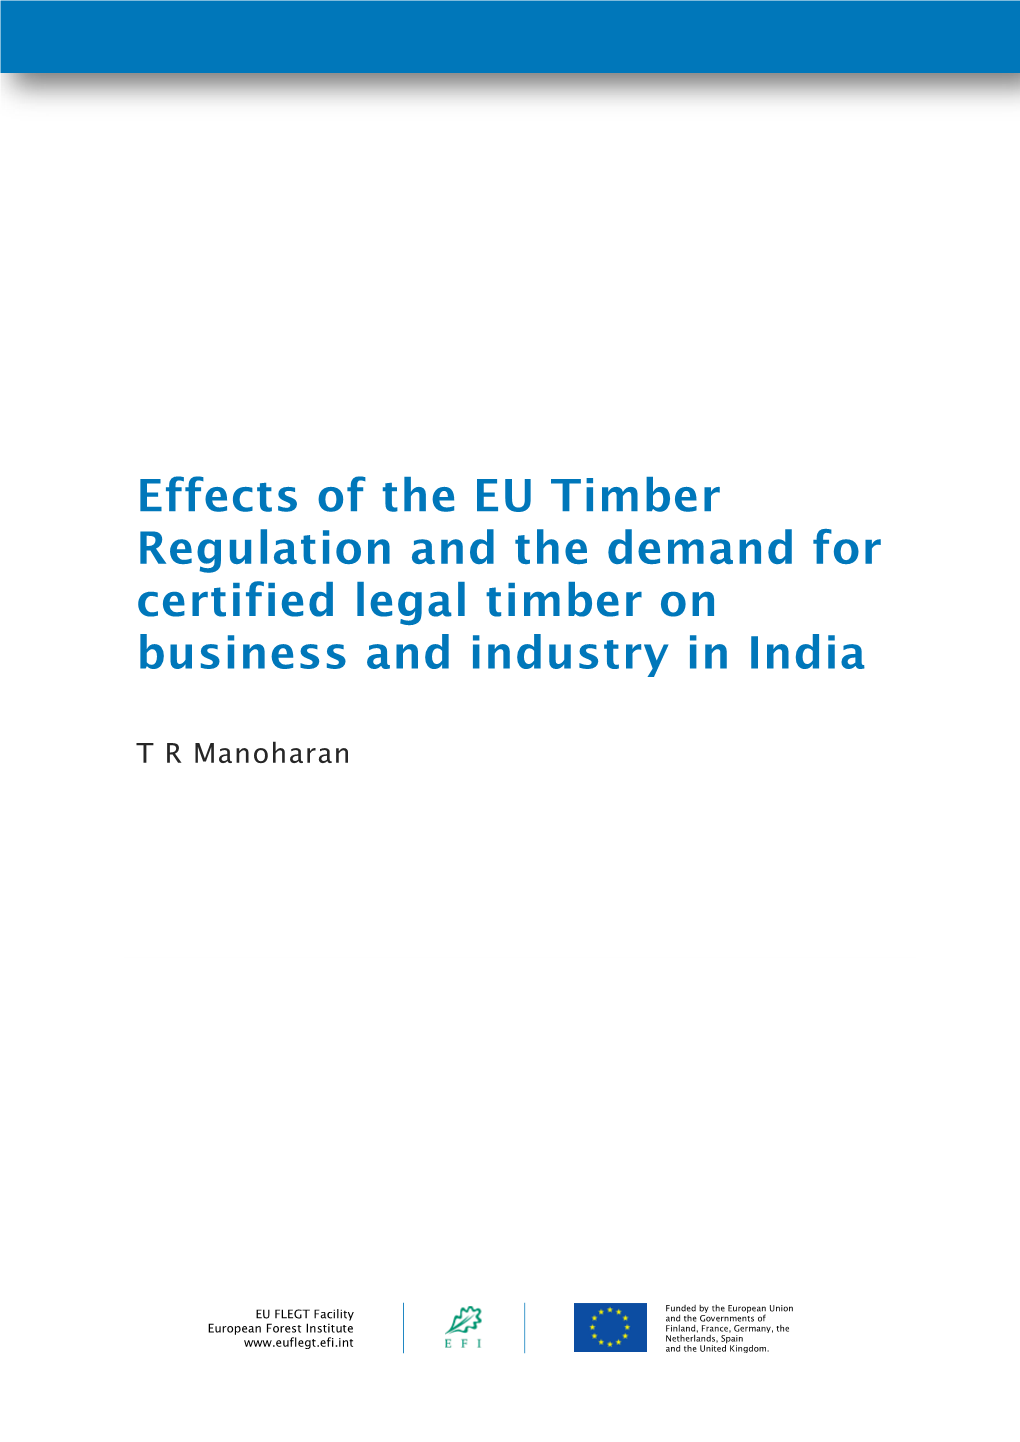 Effects of the EU Timber Regulation and the Demand for Certified Legal Timber on Business and Industry in India